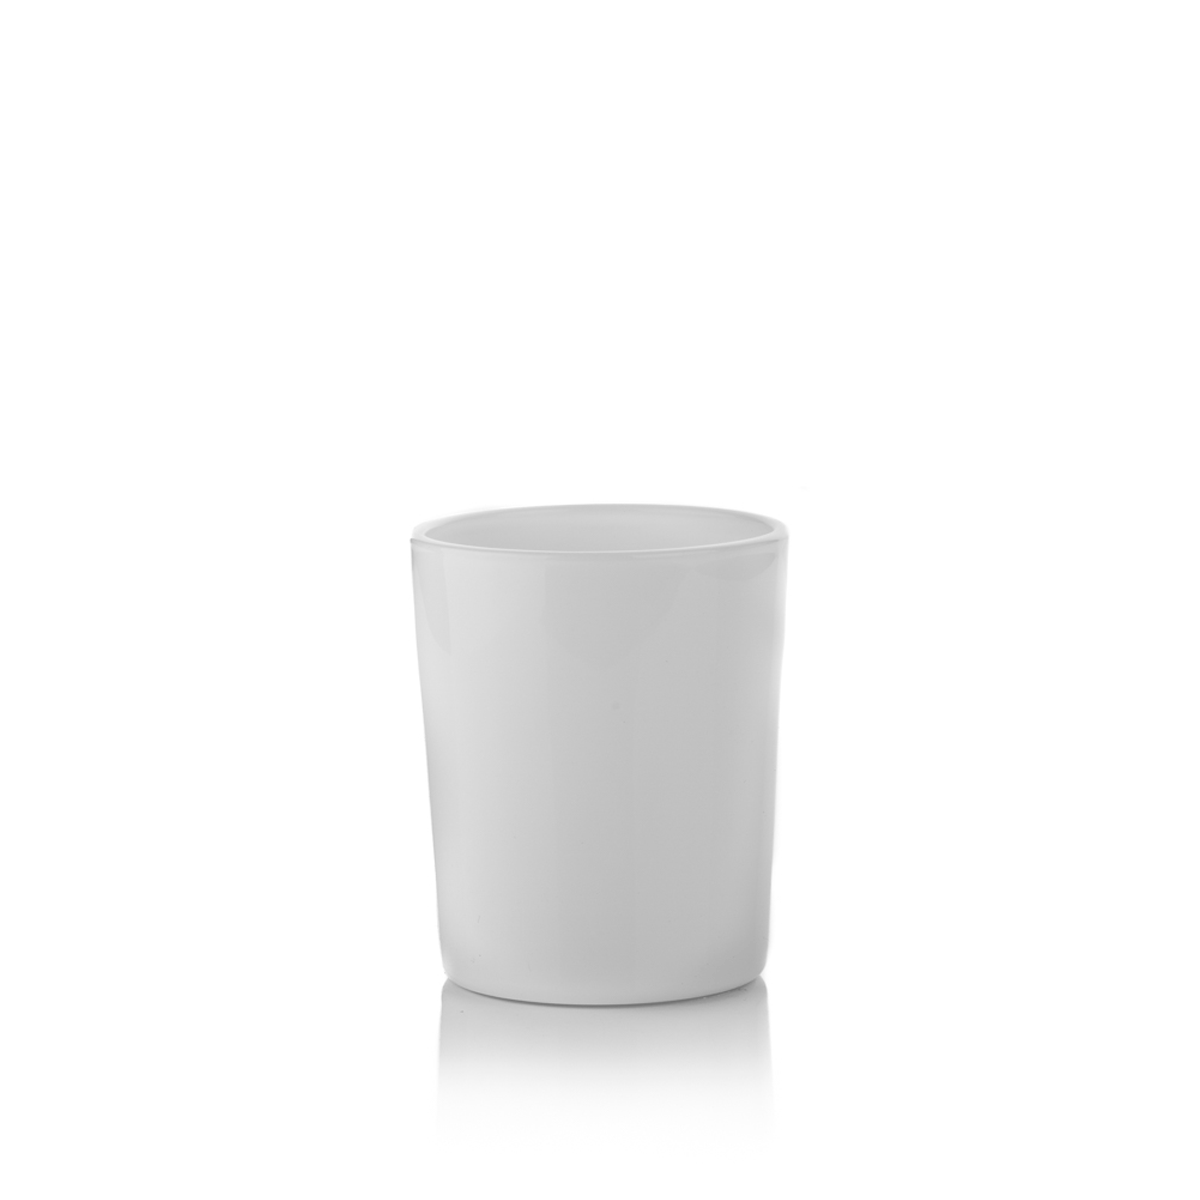 Candle Shack Candle Jar 9cl Lauren Candle Glass - Externally White Gloss